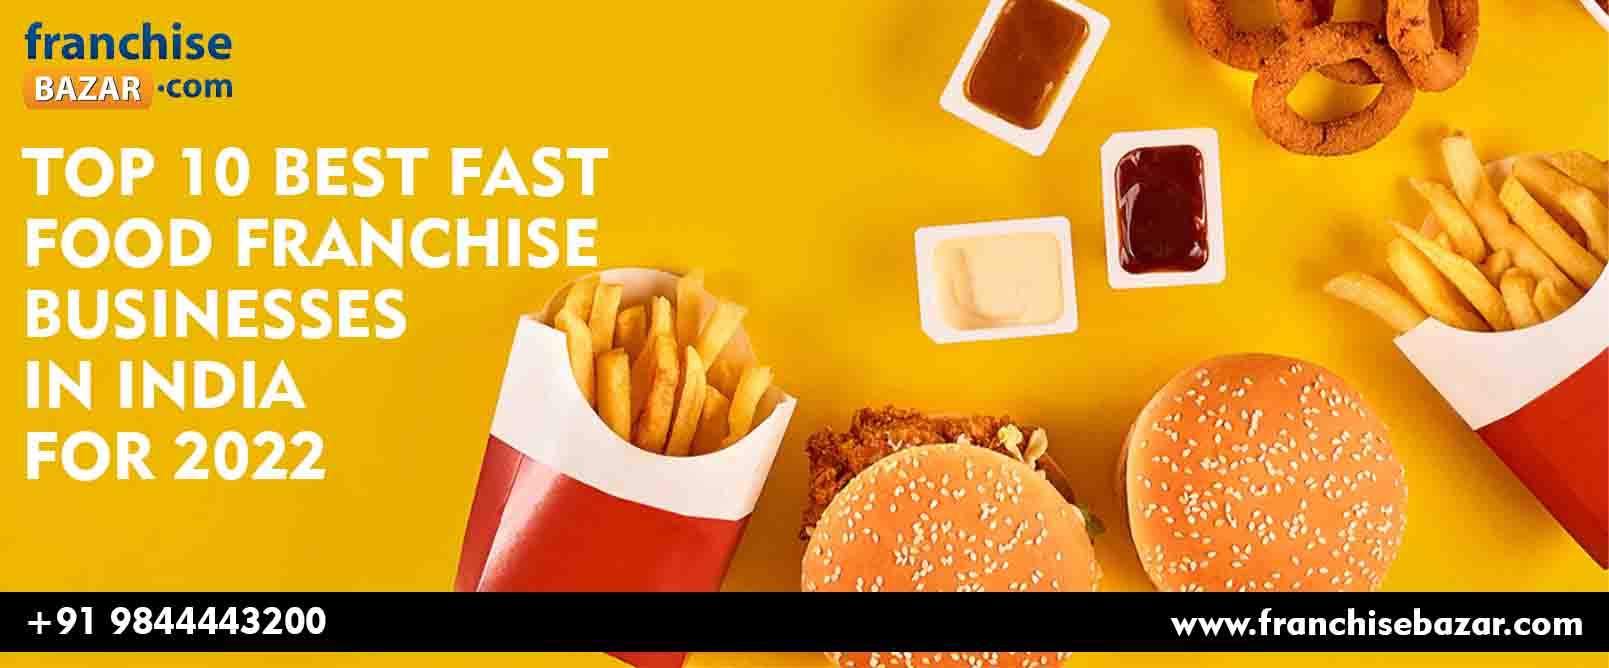 Top 10 Best Fast Food Franchise Businesses In India For 2022 [Best Picks]